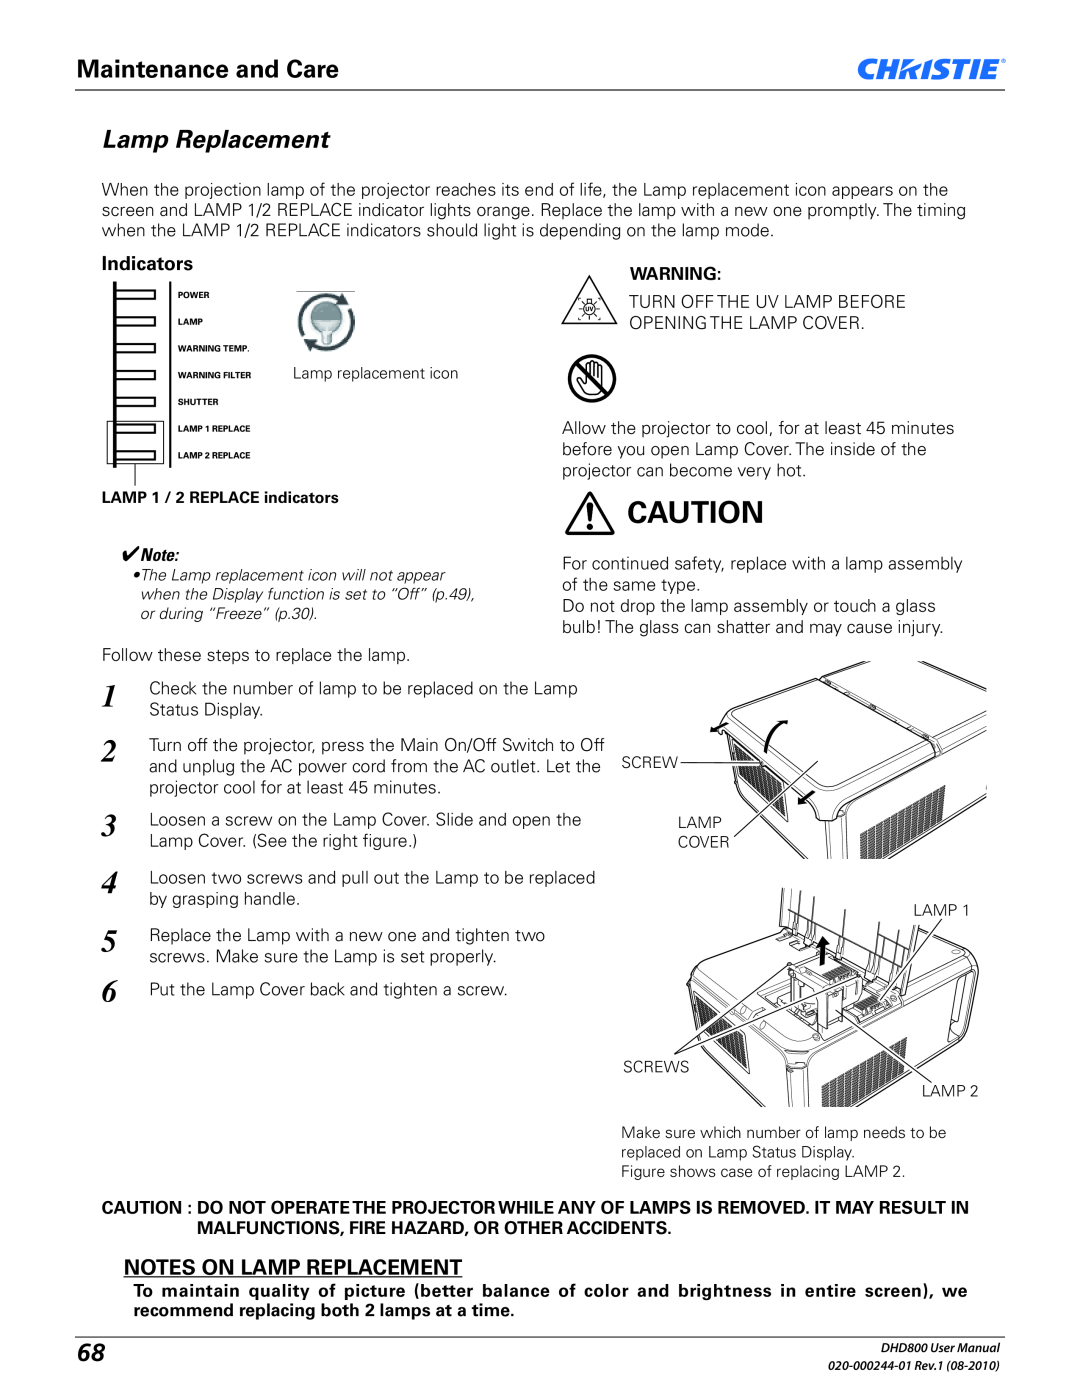 Christie Digital Systems DHD800 user manual Maintenance and Care, Notes On Lamp Replacement, Indicators 